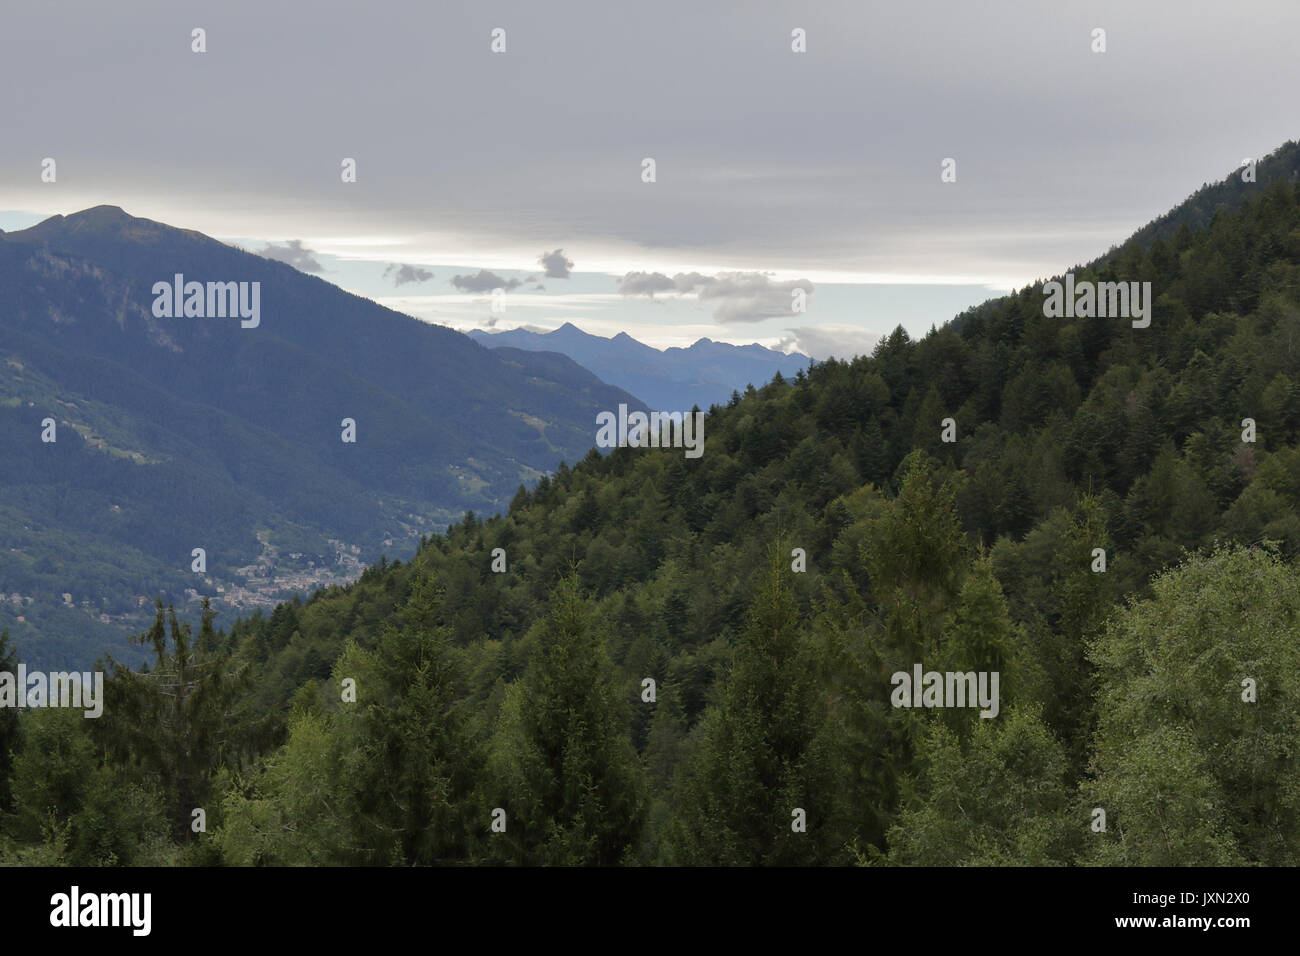 A landscape of green mountains, with pines and firs, rocks and glaciers, in the Vigezzo Valley, northern Italian Alps Stock Photo